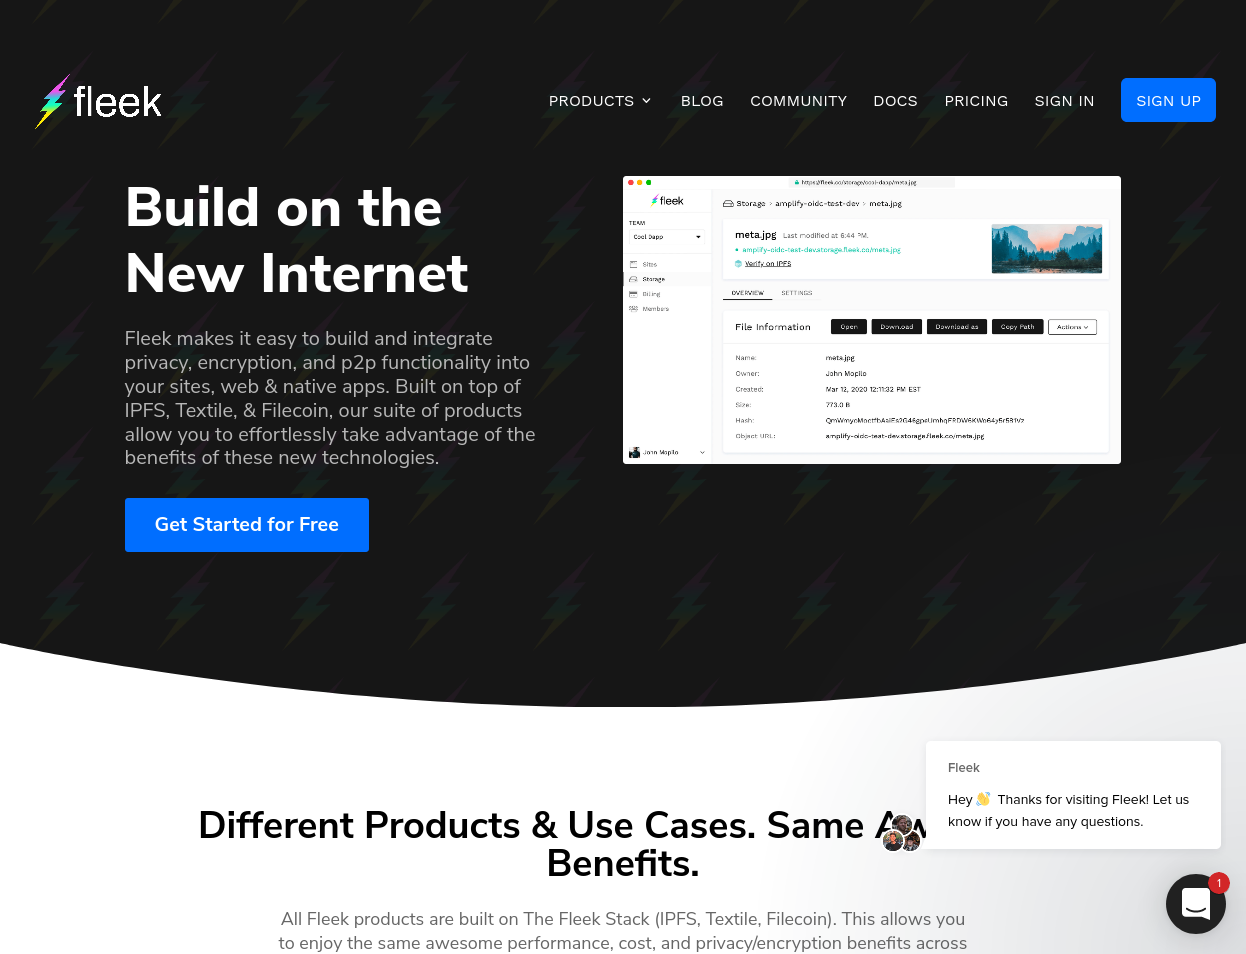 The Fleek homepage, showing a "Build on the New Internet" slogan at the top.